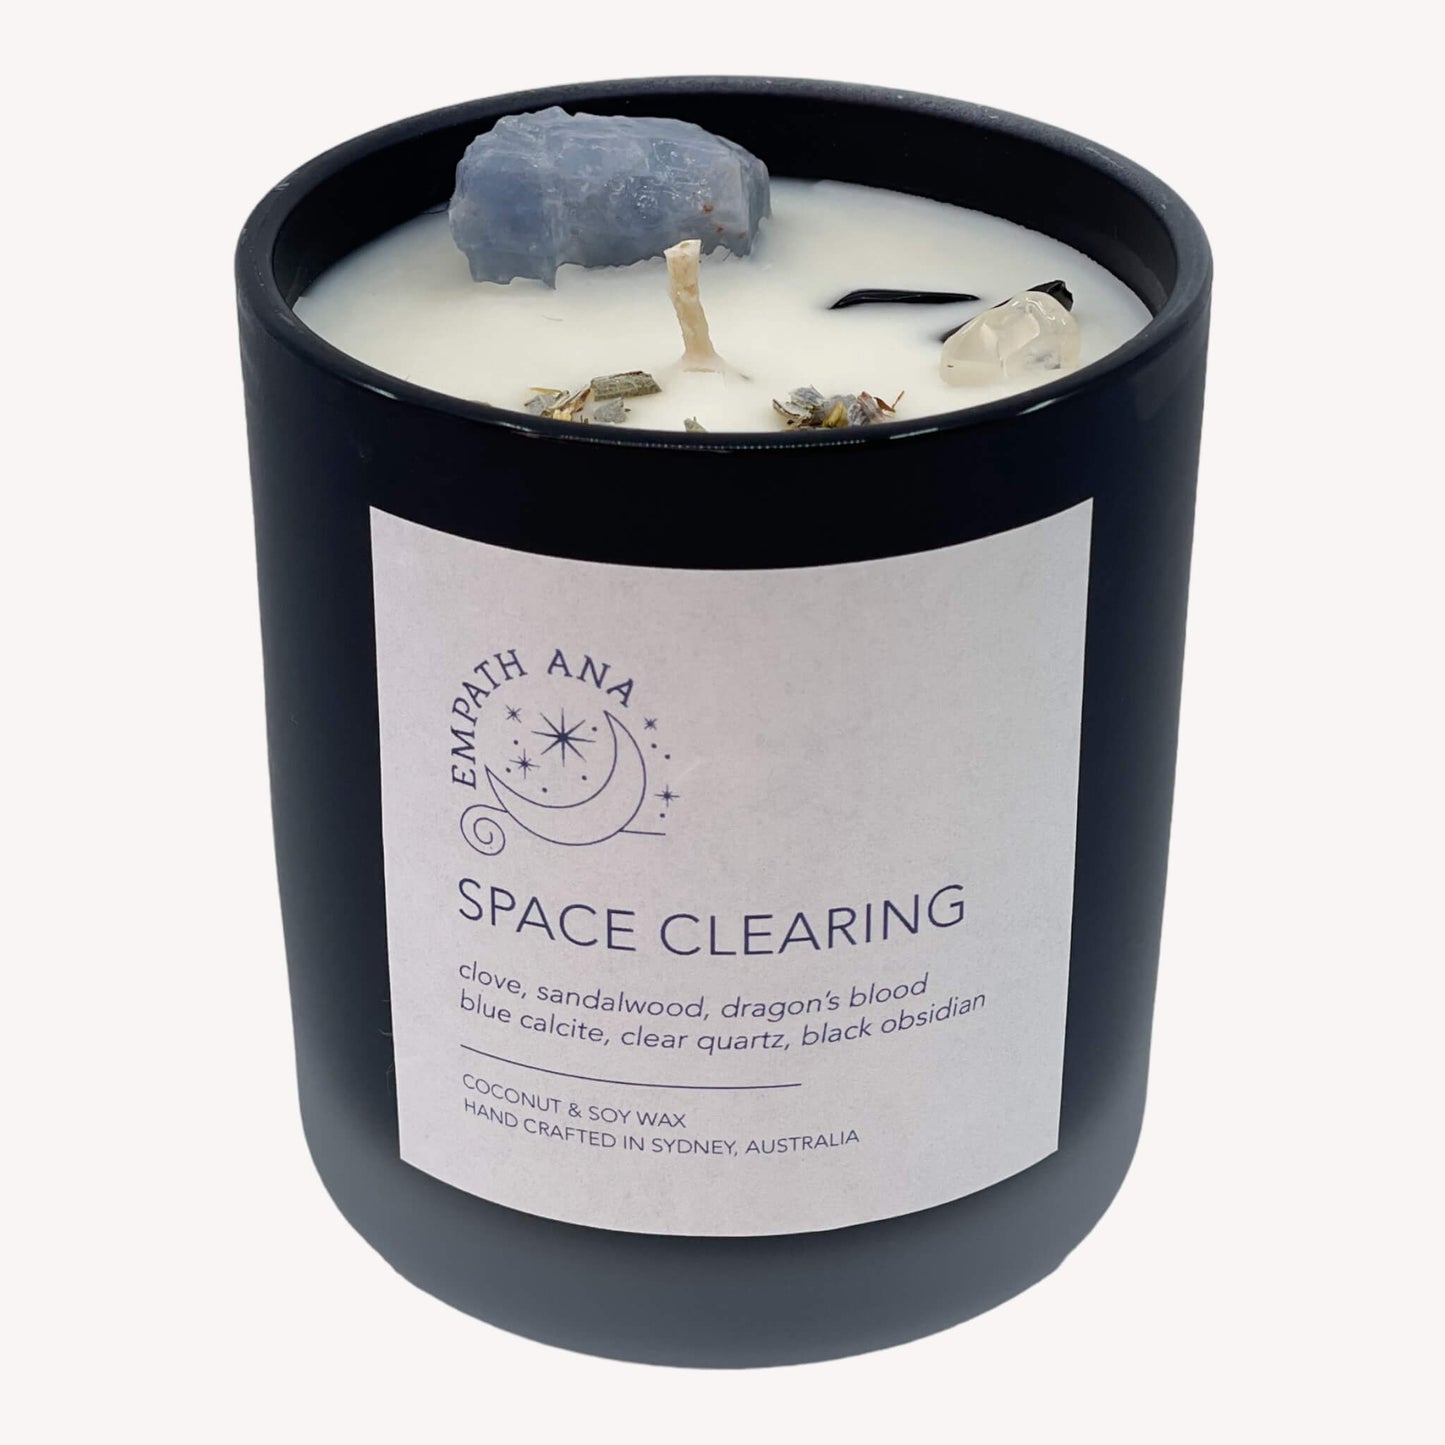 A captivating view of the Medium Space Clearing Crystal Candle, adorned with Blue Calcite, Clear Quartz, and Black Obsidian crystals.